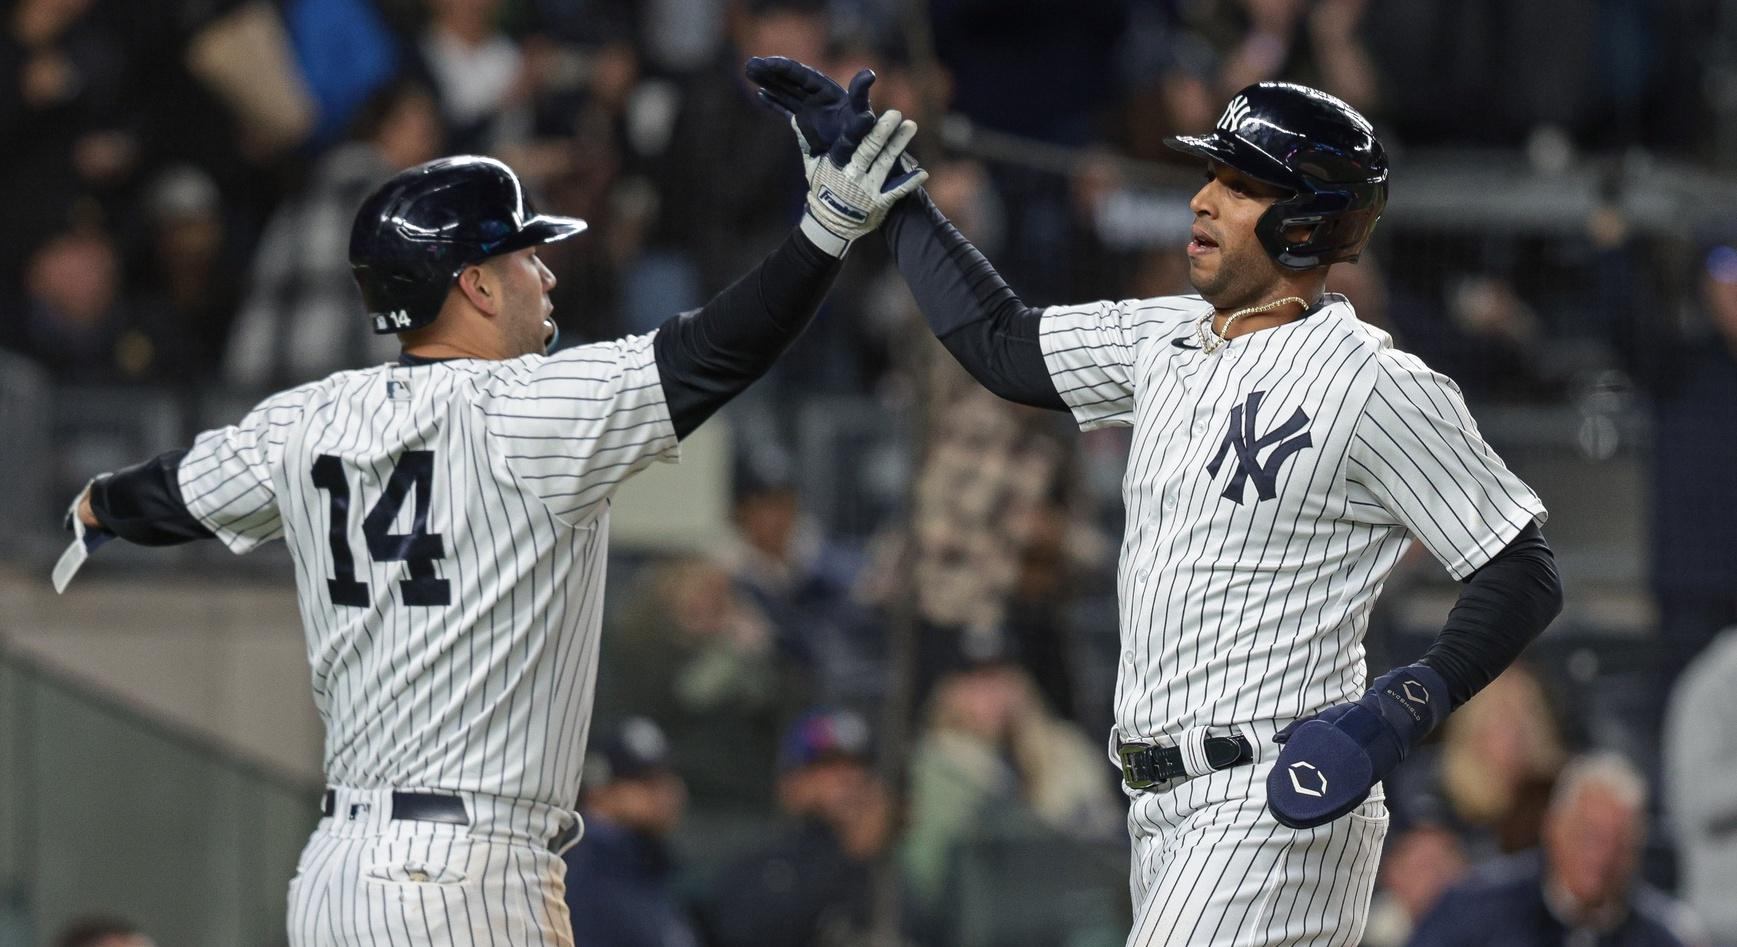 New York Yankees first baseman Marwin Gonzalez (14) and left fielder Aaron Hicks (31) celebrate after scoring during the fifth inning against the Boston Red Sox at Yankee Stadium. / Vincent Carchietta-USA TODAY Sports